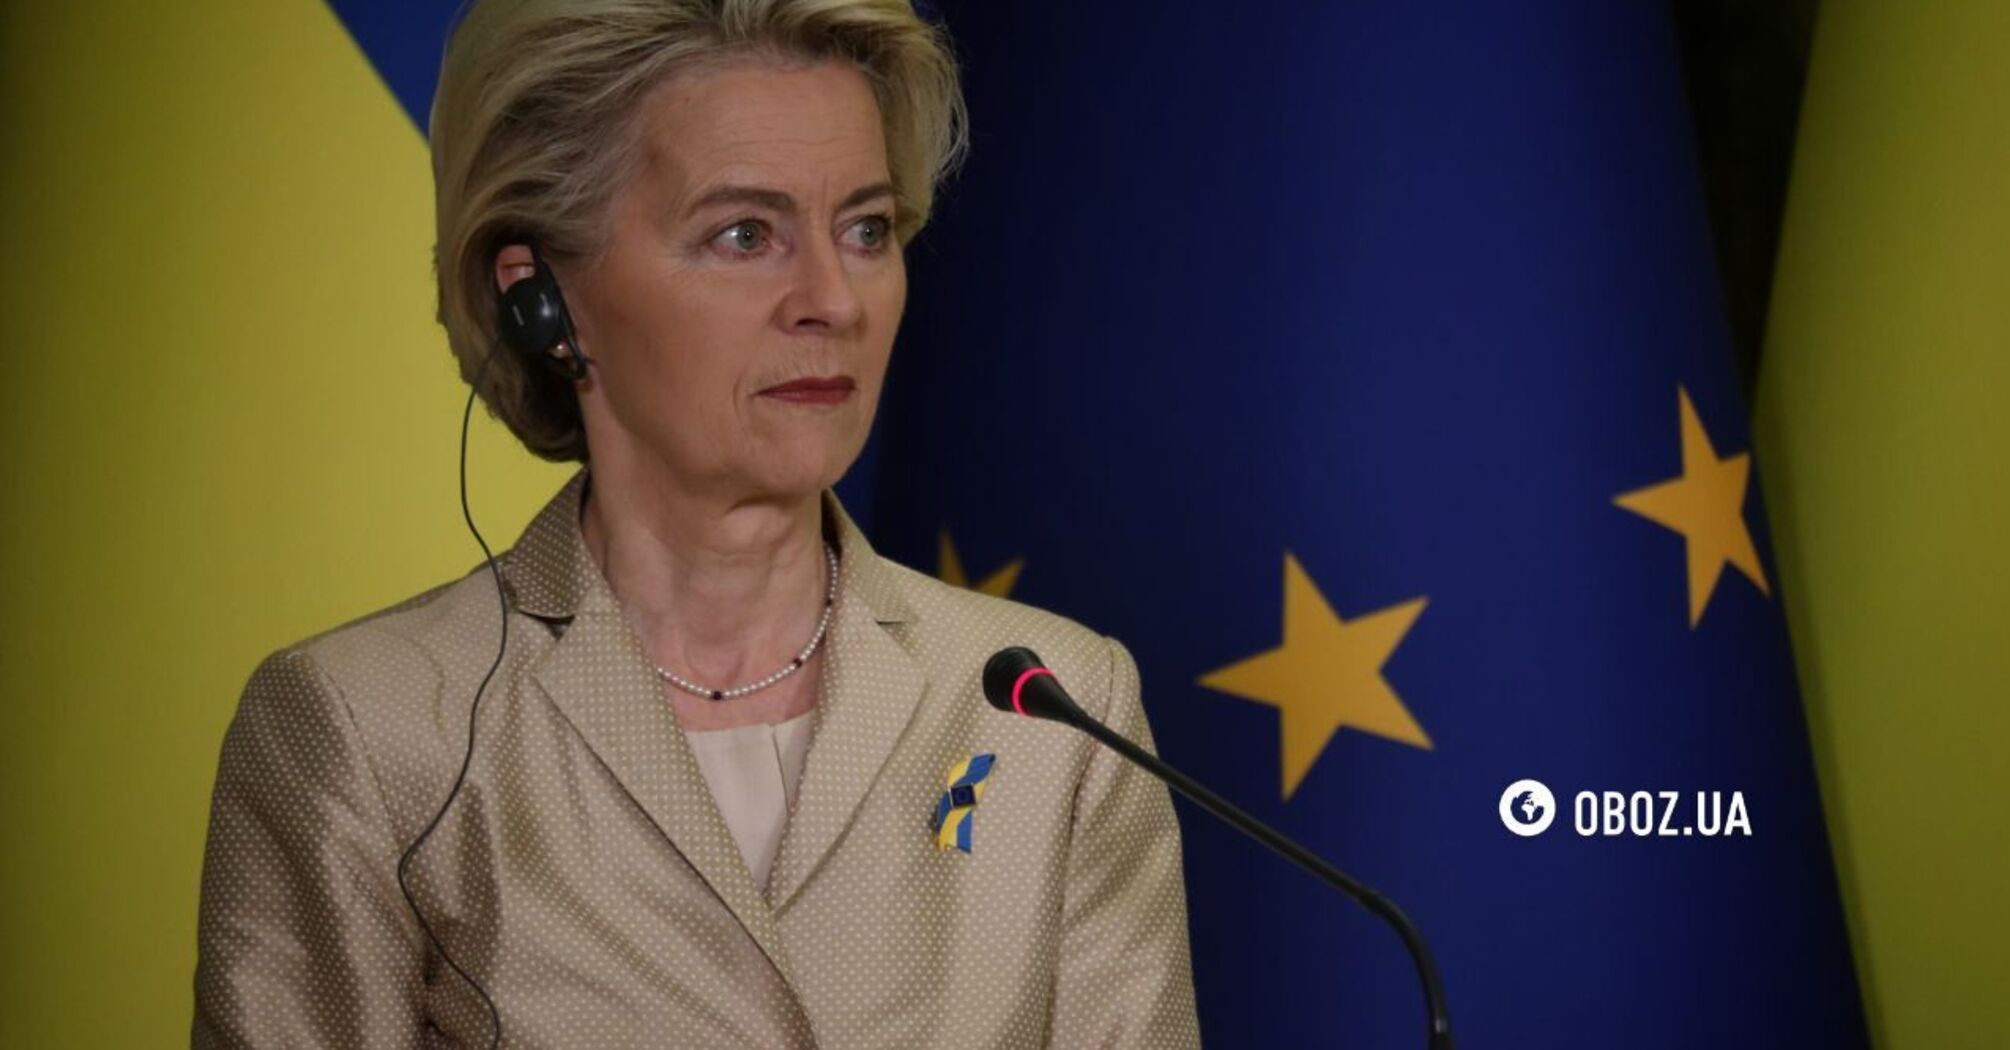 EU should start negotiations on Ukraine's accession by the end of June as the country fulfilled all recommendations - von der Leyen